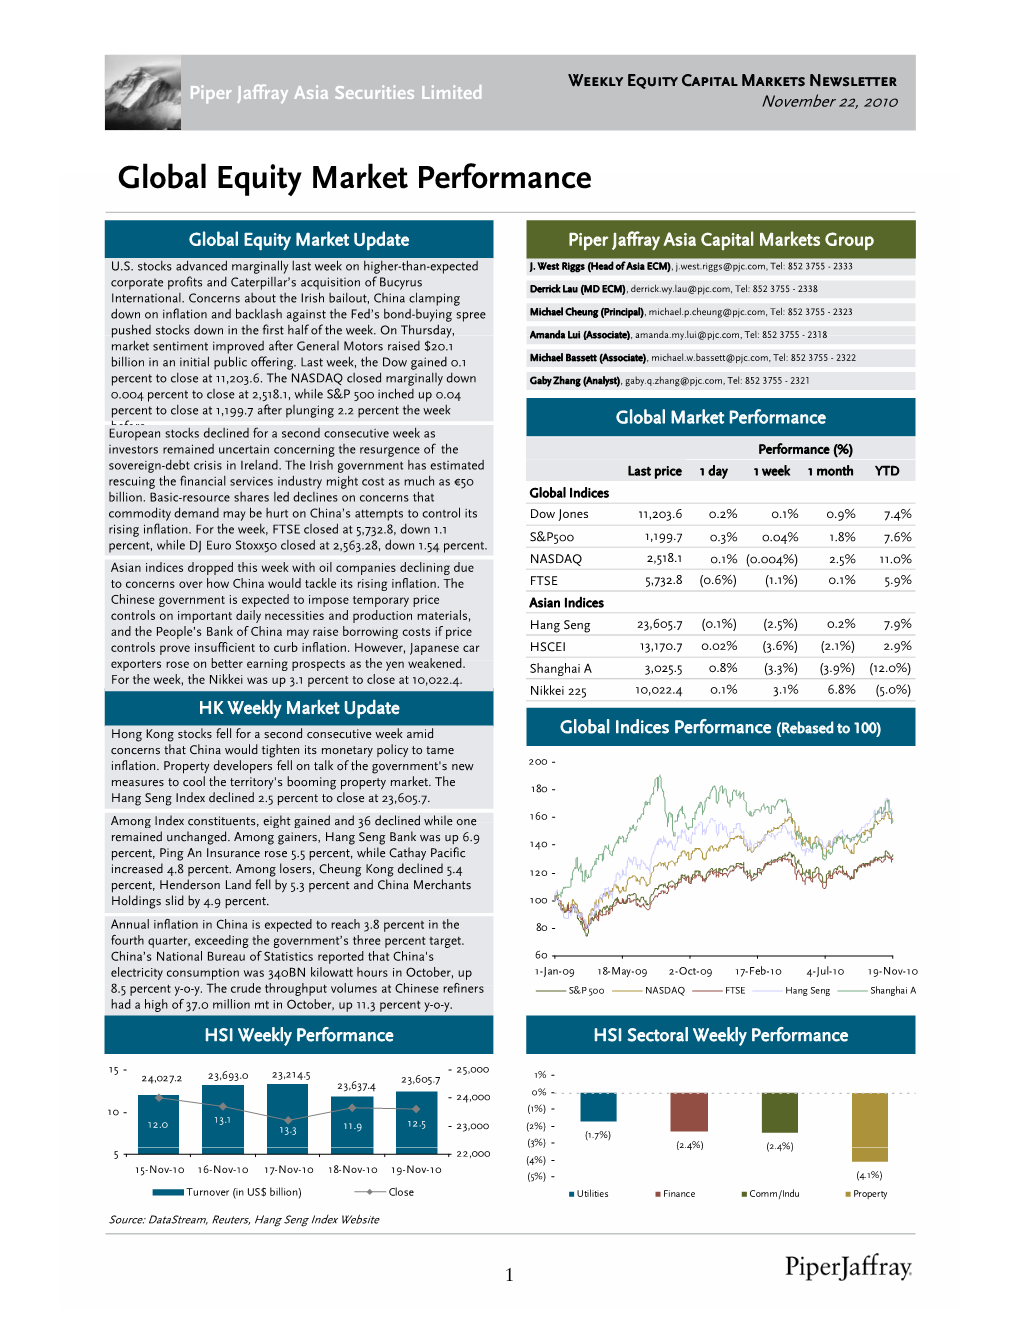 Global Equity Market Performance